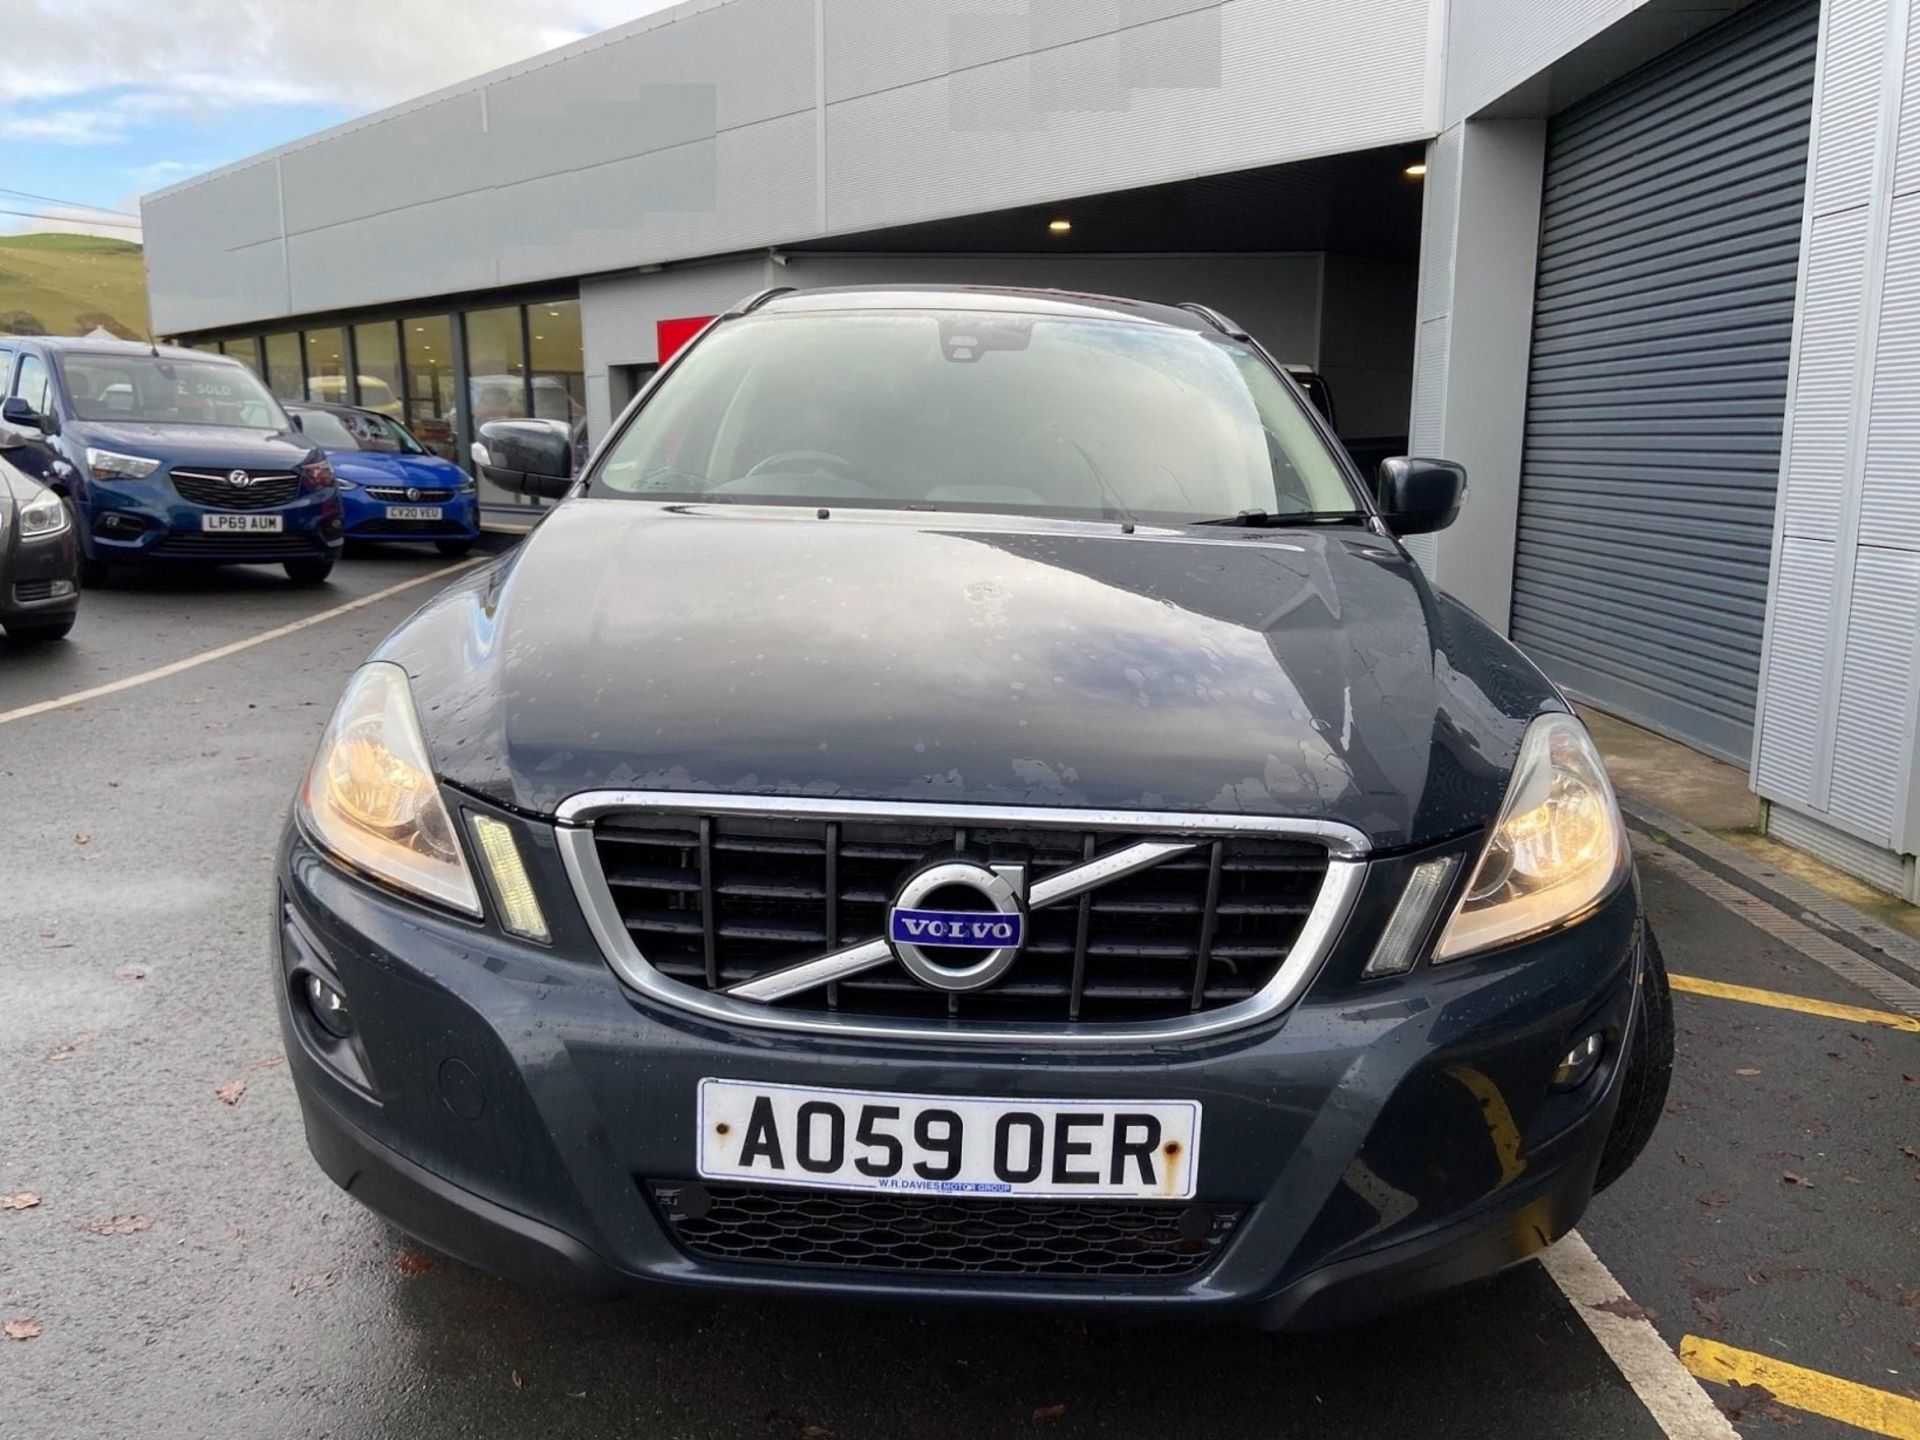 2009 Volvo XC60 2.4 D5 SE SUV 5dr 4x4 - CL505 - NO VAT ON THE HAMMER - Locatio - Image 11 of 17